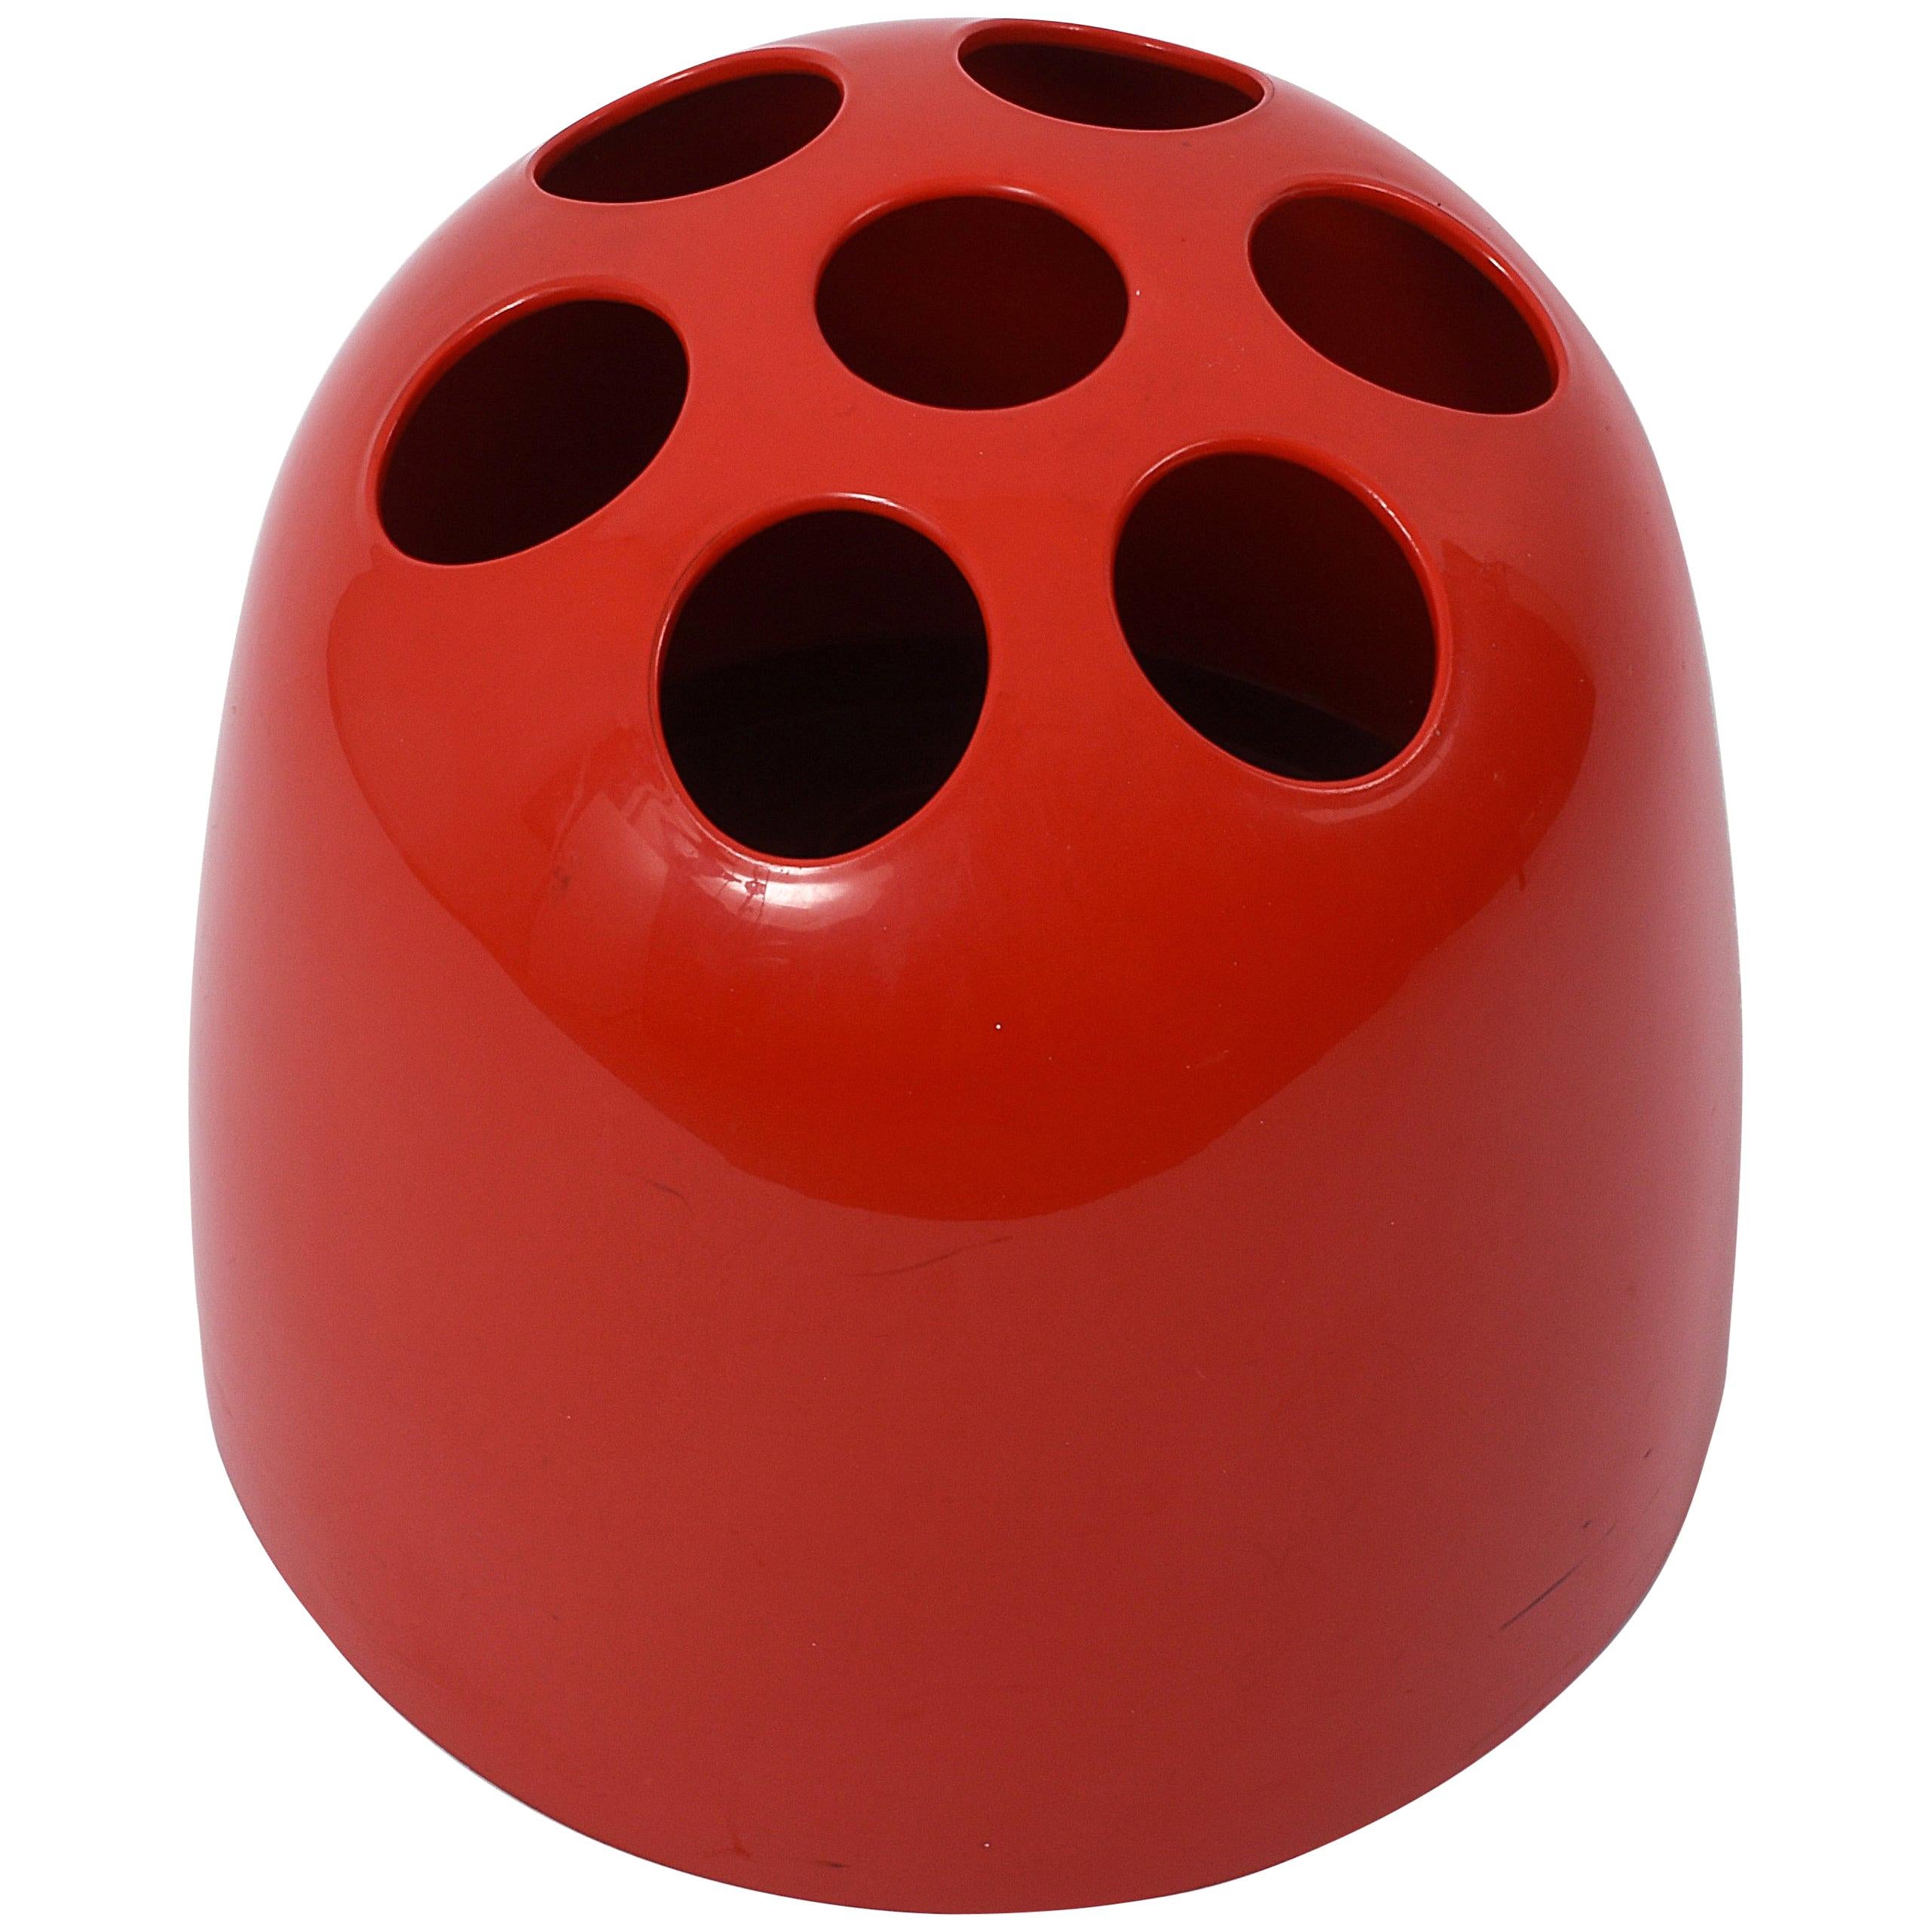 This umbrella stand, model Dedalo, was designed by Emma Gismondi Schweinberger and manufactured by Artemide in 1966. It is made from ABS plastic in red. The original object was produced in three different sizes: Small pencil holders (Dedalino),